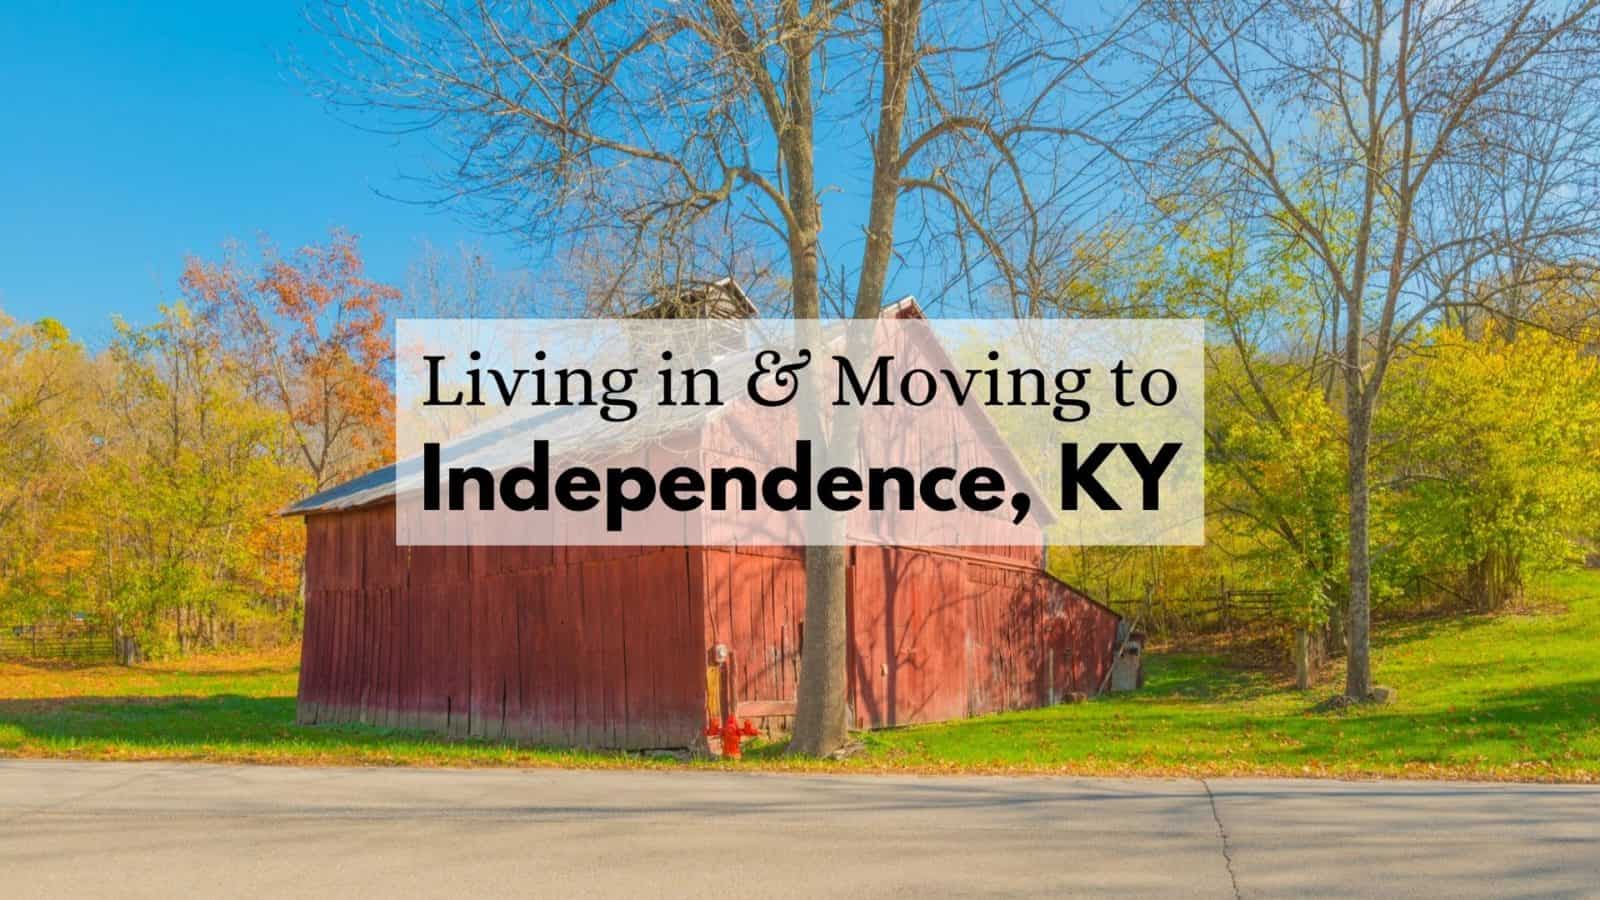 Living in & Moving to Independence, KY